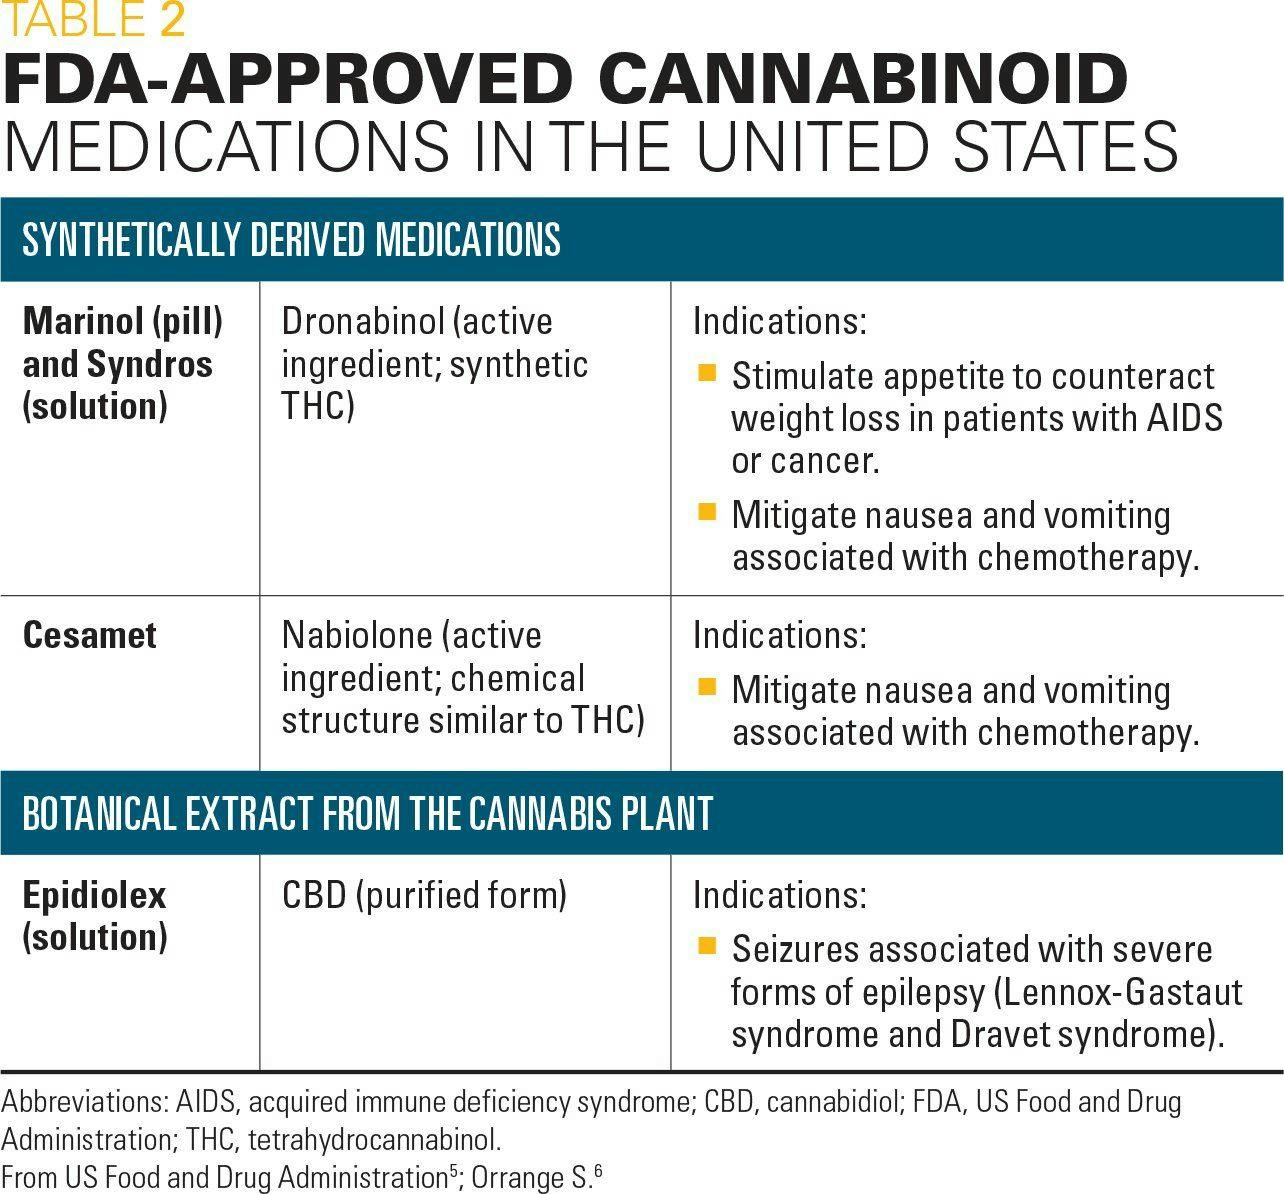 FDA-approved cannabinoid medications in the United States